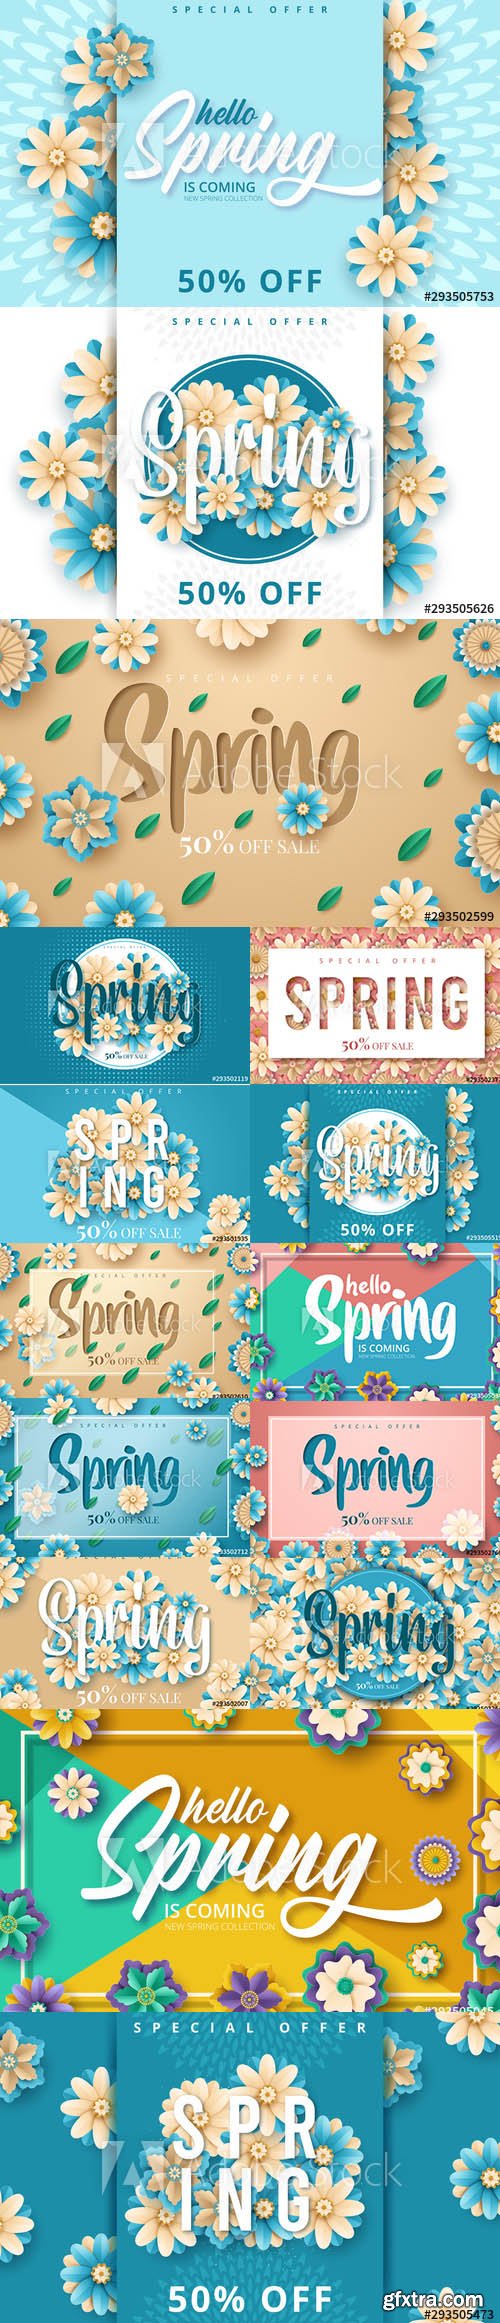 Set of Spring Sale Backgrounds with Flowers vol4